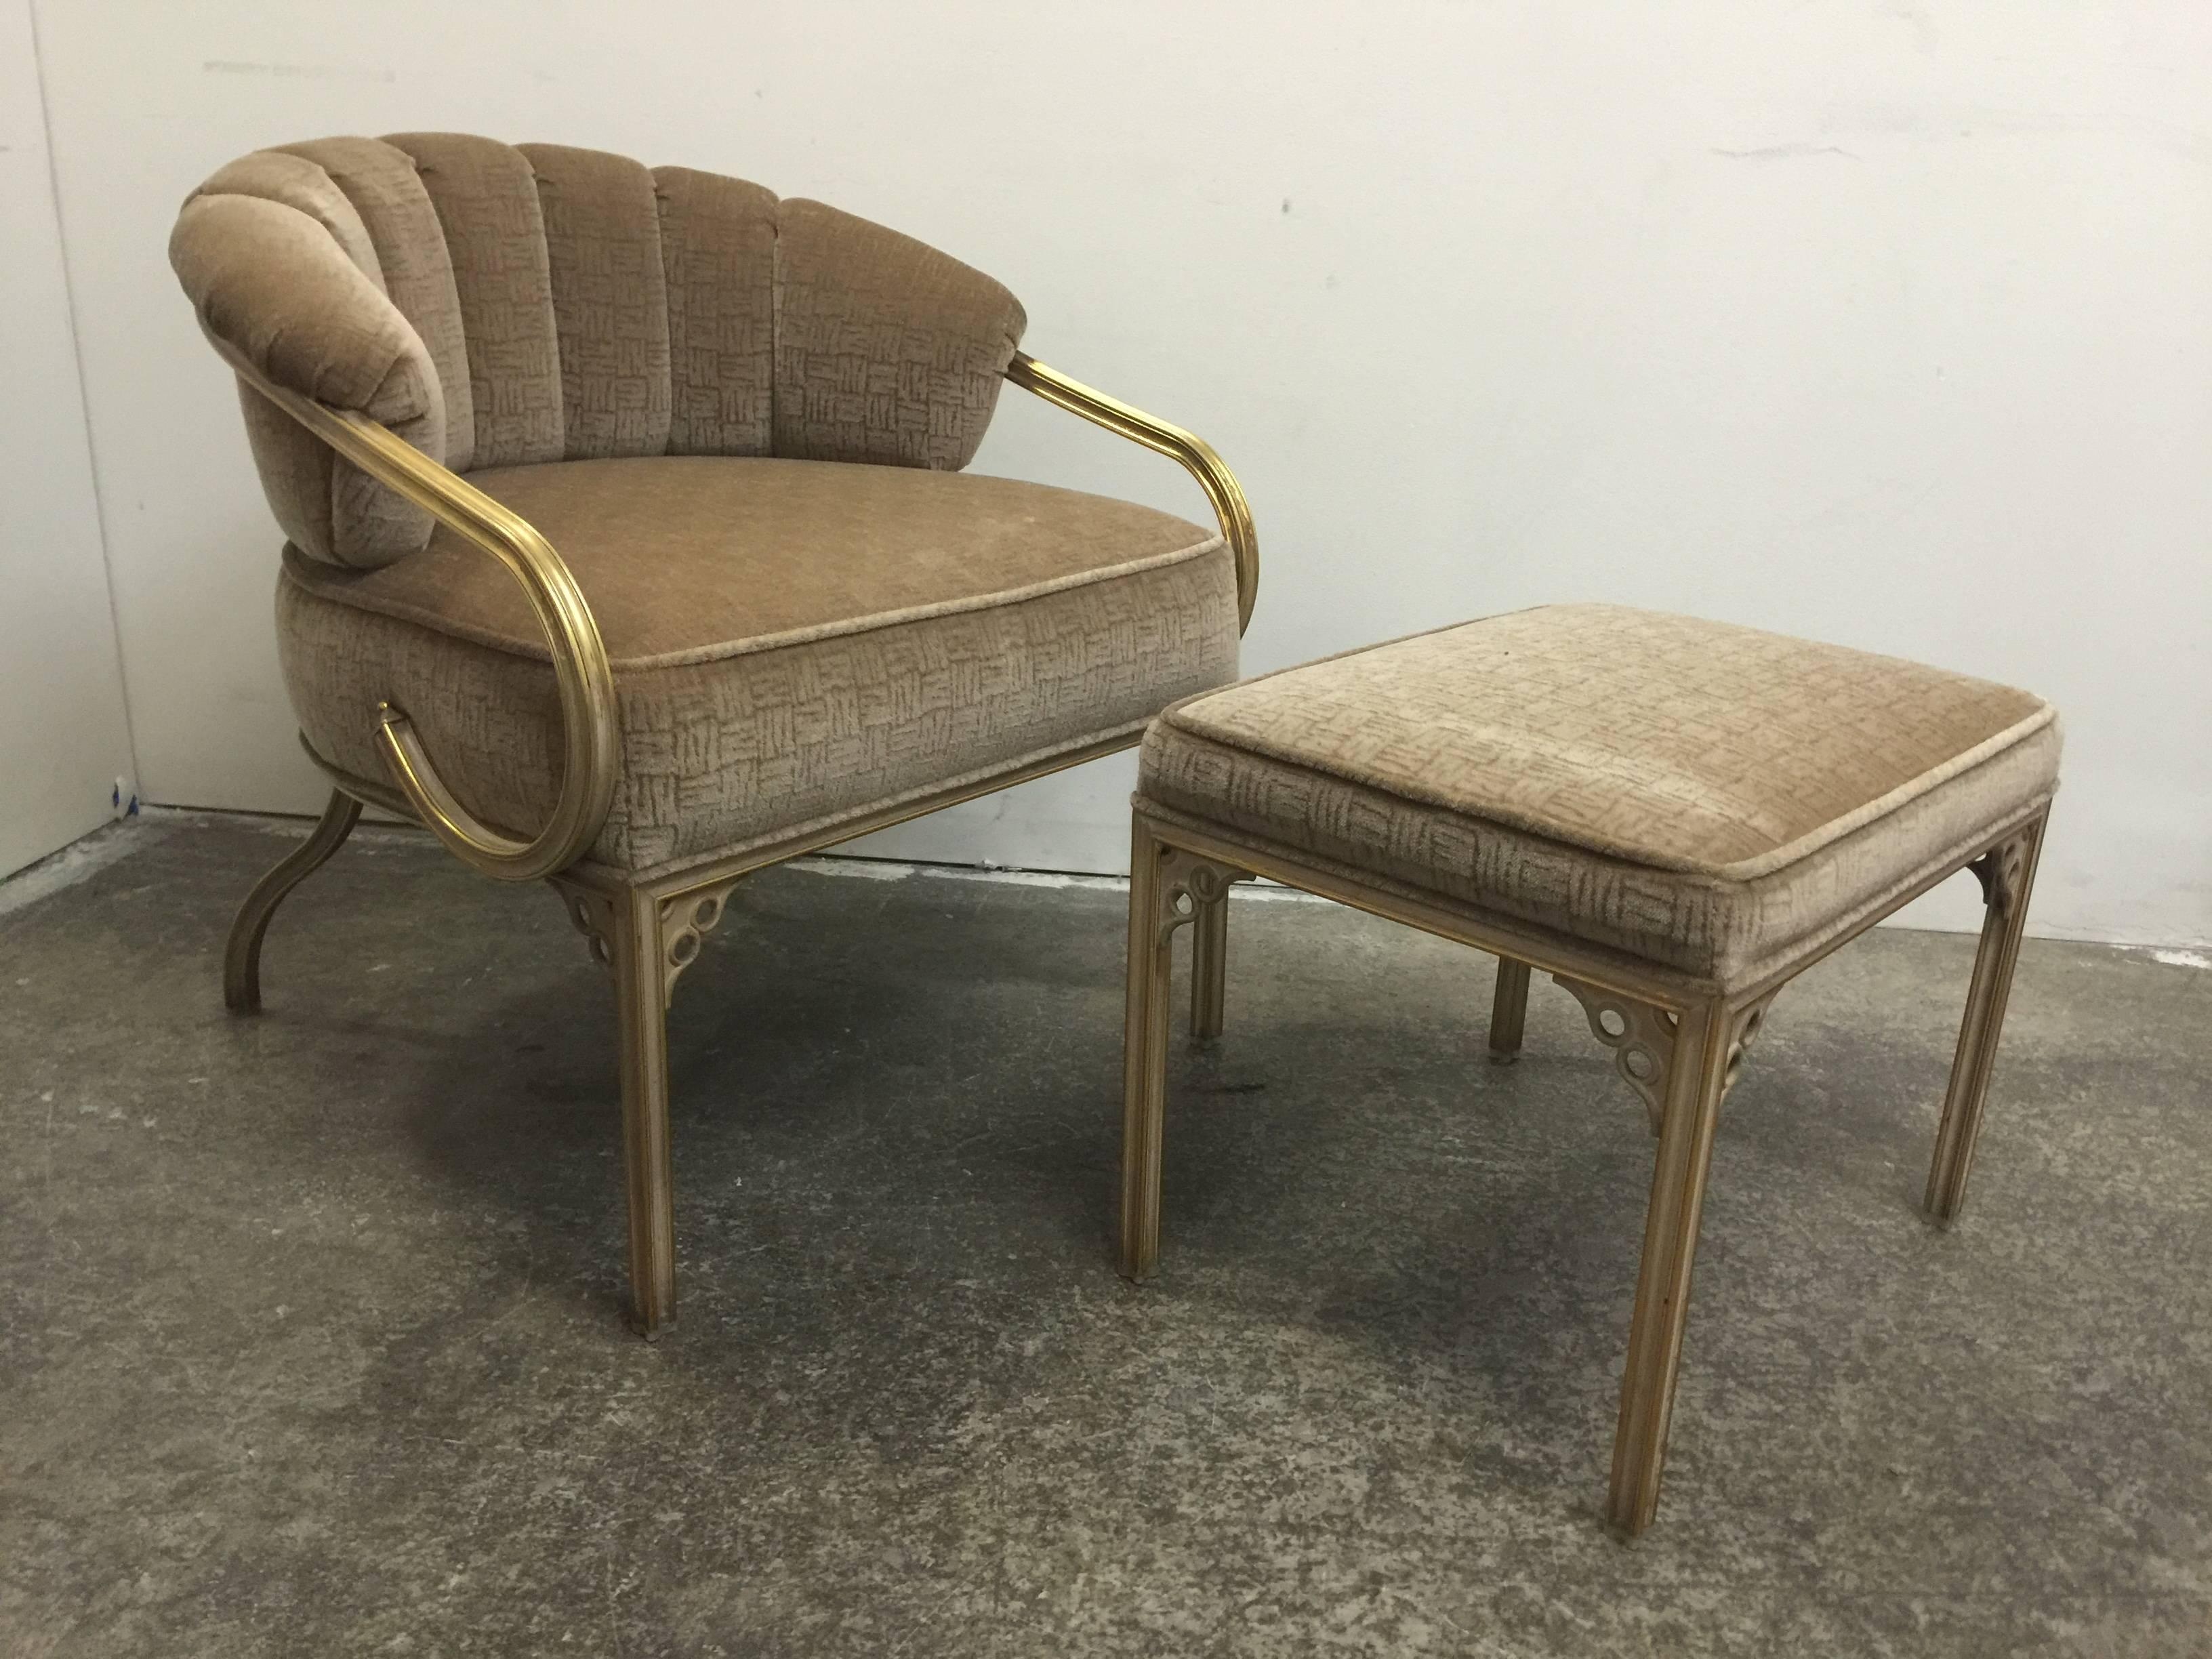 Graceful scrolled arm brass chair and ottoman with mohair upholstery. 

Dimensions: 28" W x 27" D x 29" T,
seat height 18".
22" W x 17" D x 15" T ottoman.
 